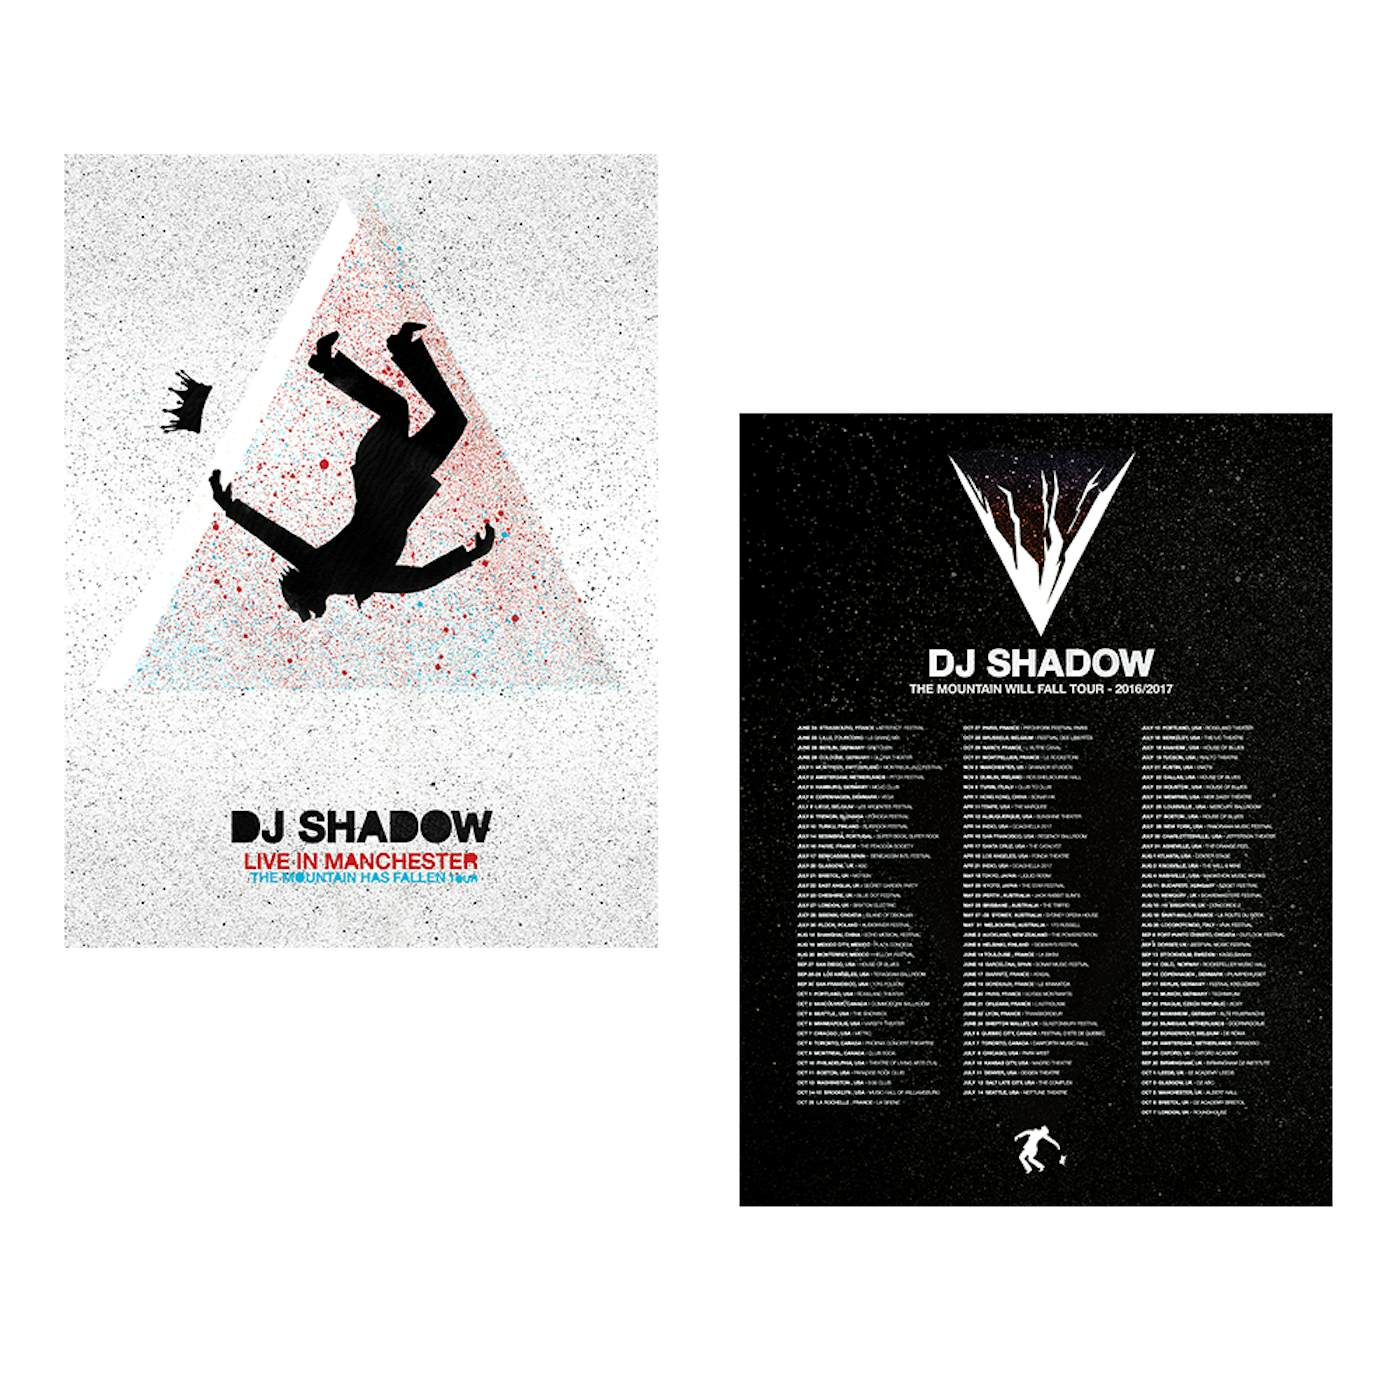 DJ Shadow Live in Manchester: The Mountain Has Fallen Tour Poster